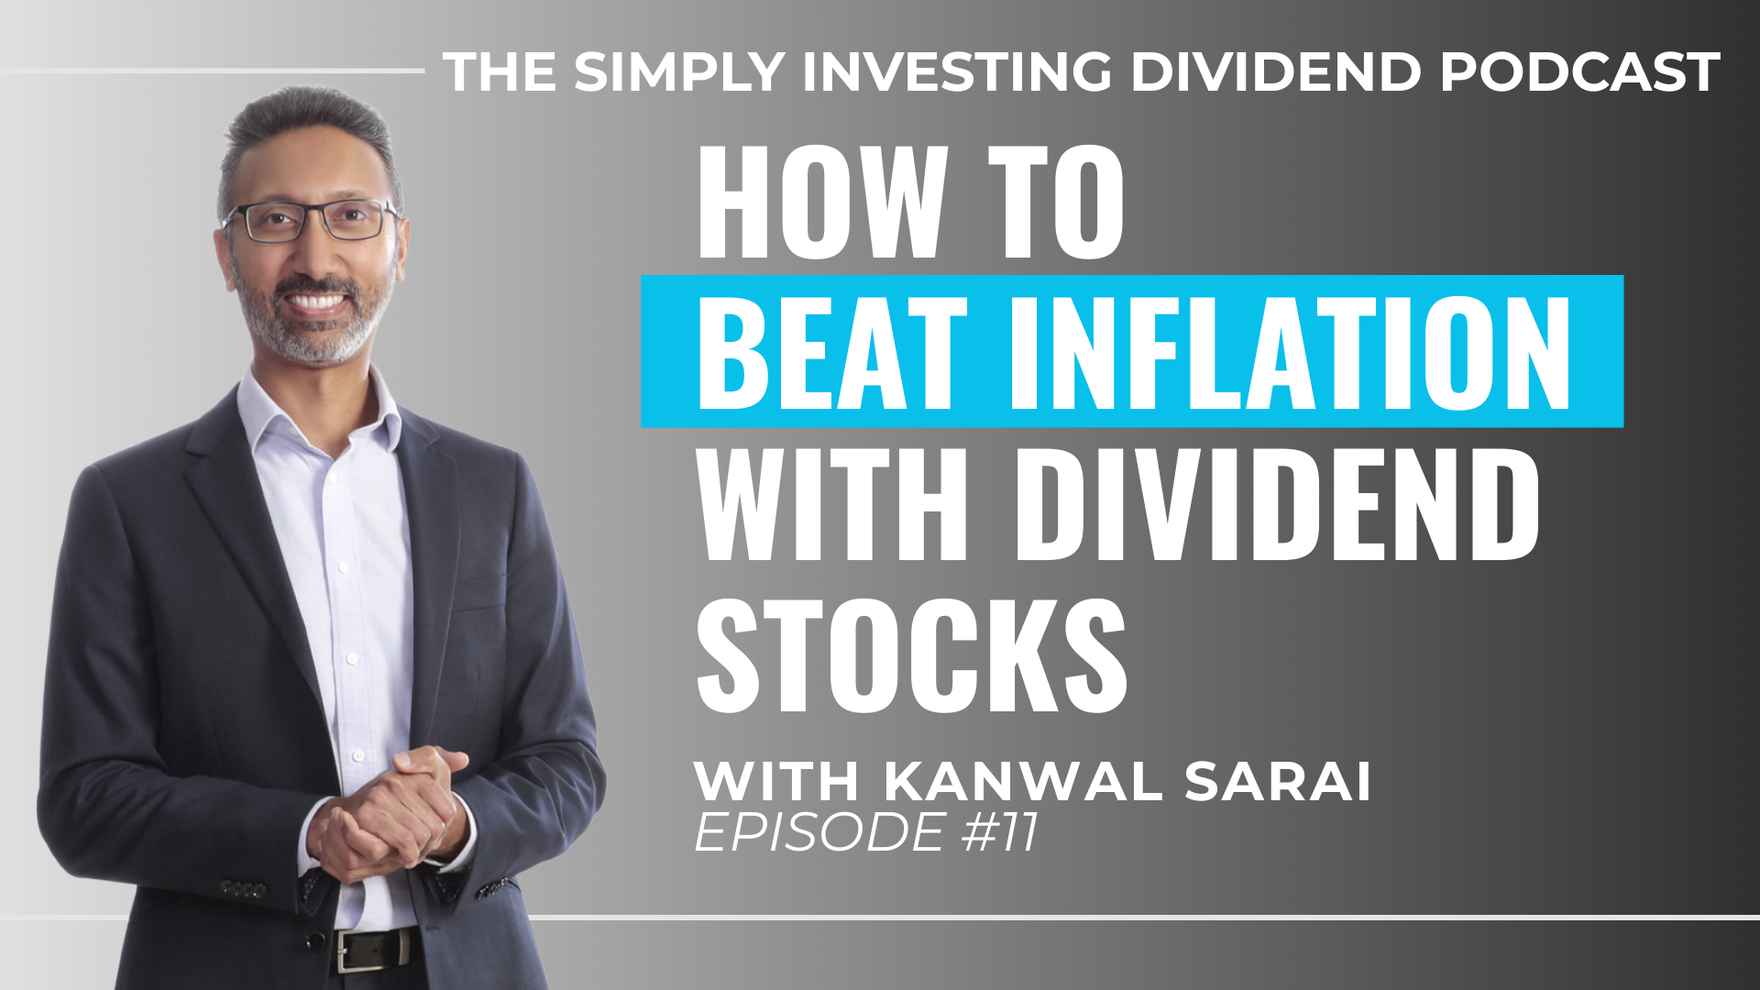 Simply Investing Dividend Podcast Episode 11 - How to Beat Inflation with Dividend Stocks